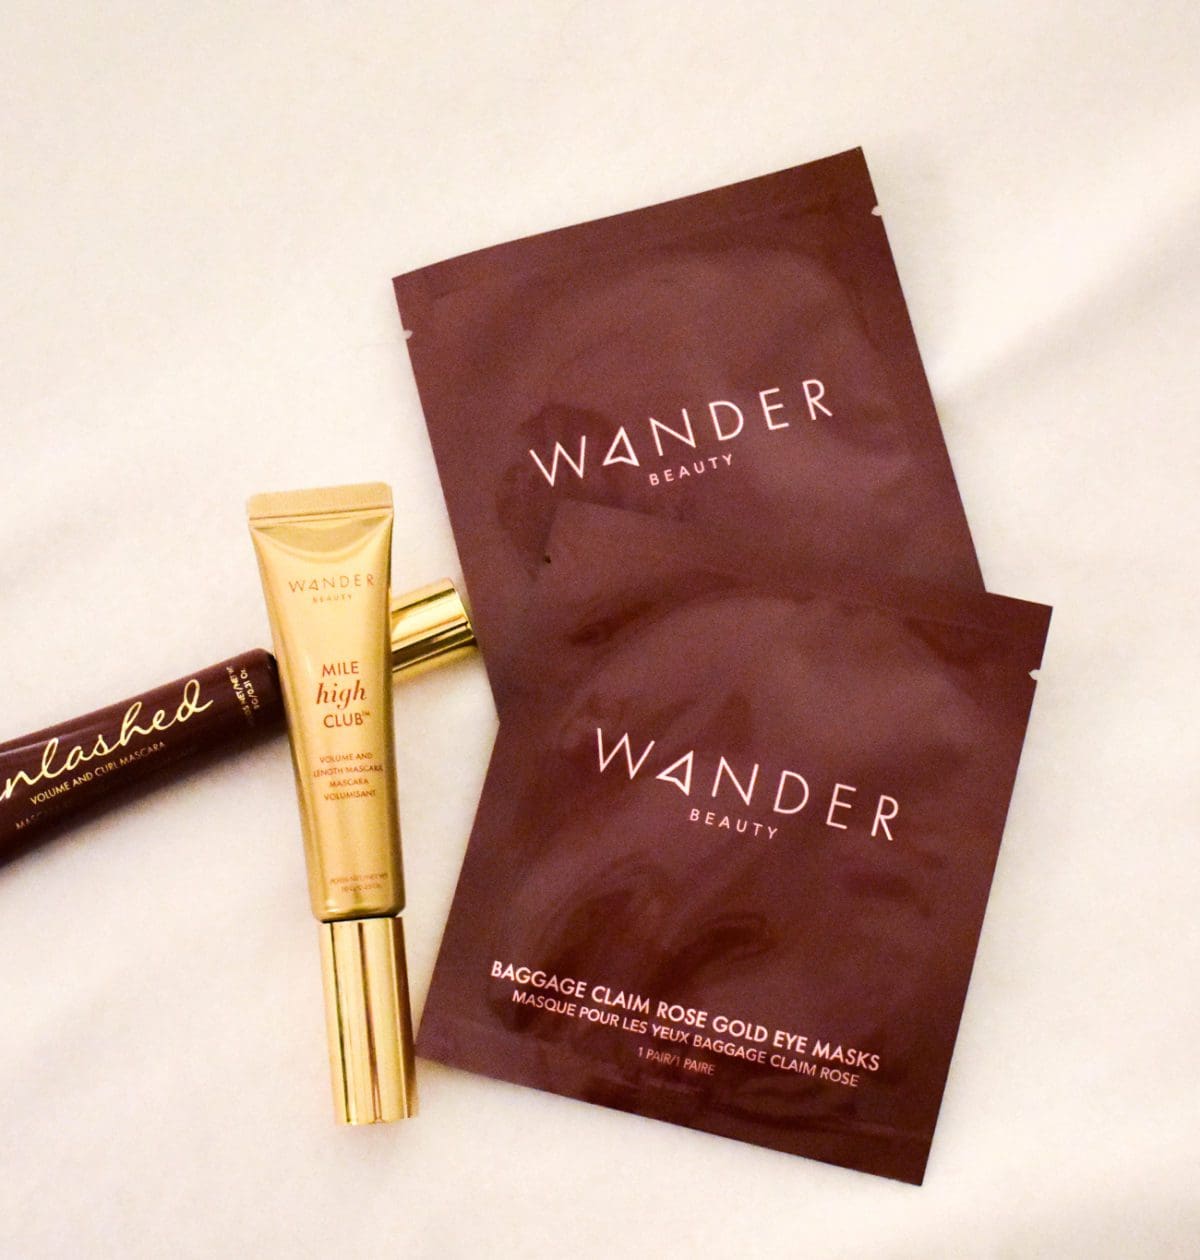 Wander Beauty sent me two mascaras to try out -- the Mile High Club Volume and Length Mascara and the Unlashed Volume and Curl Mascara. These clean beauty formulas give you beautifully defined eyes while nourishing the lashes themselves. Read my full review of the products here!